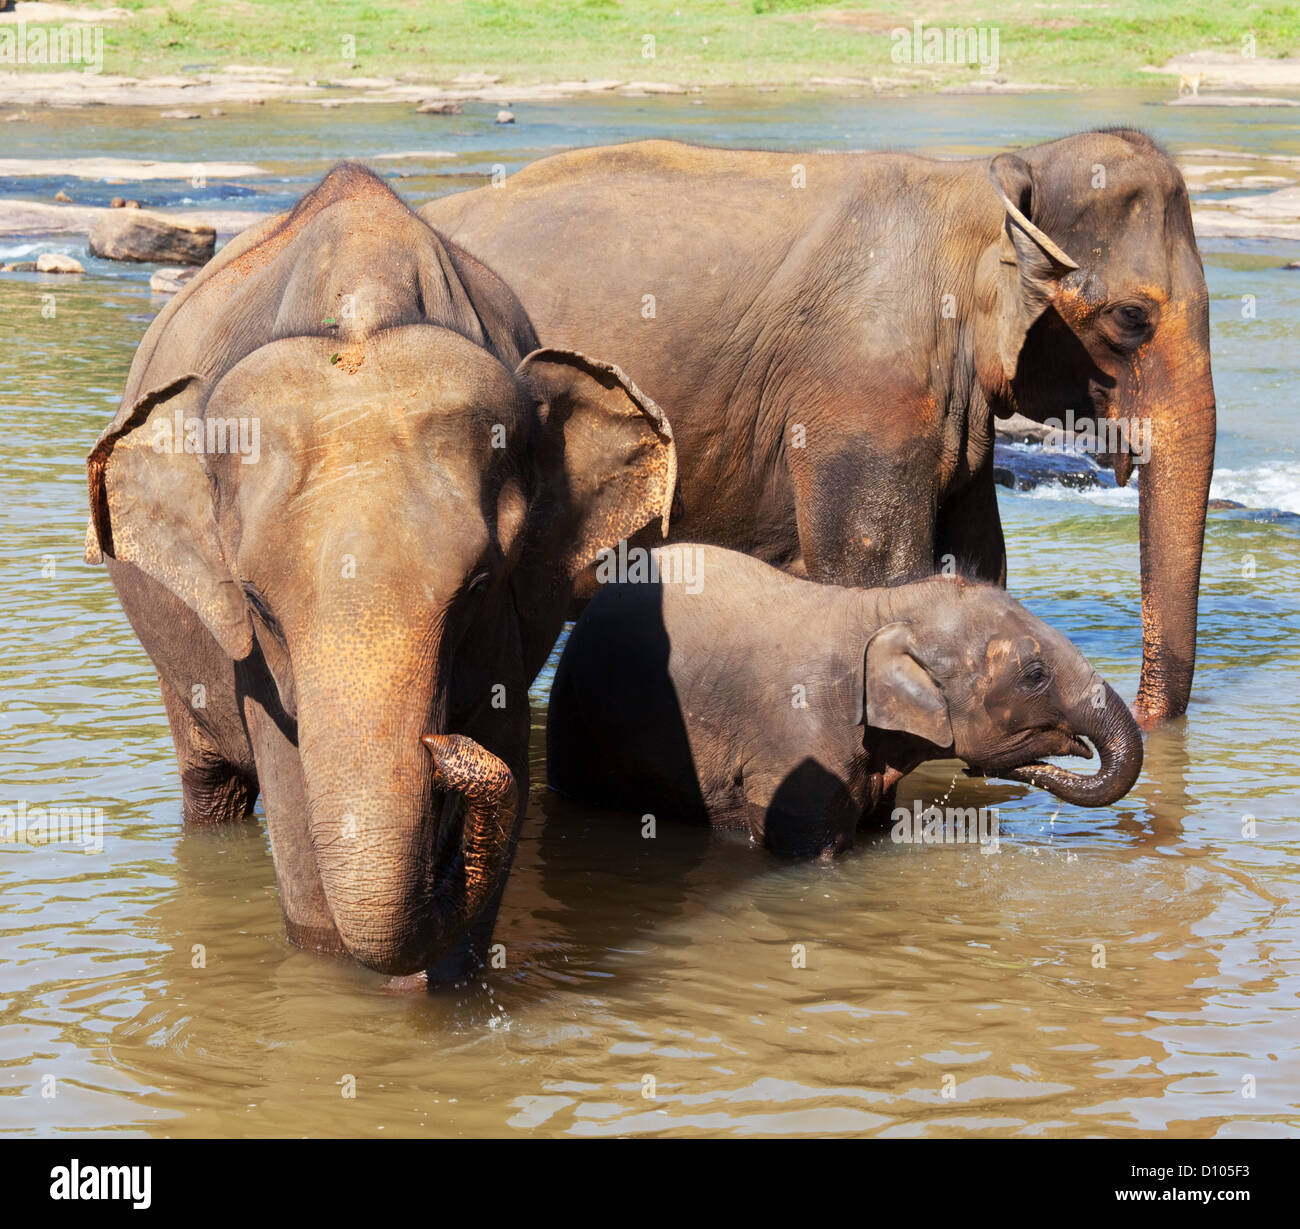 Elephants from the Pinnewala Elephant Orphanage enjoy their daily bath at the local river. Stock Photo